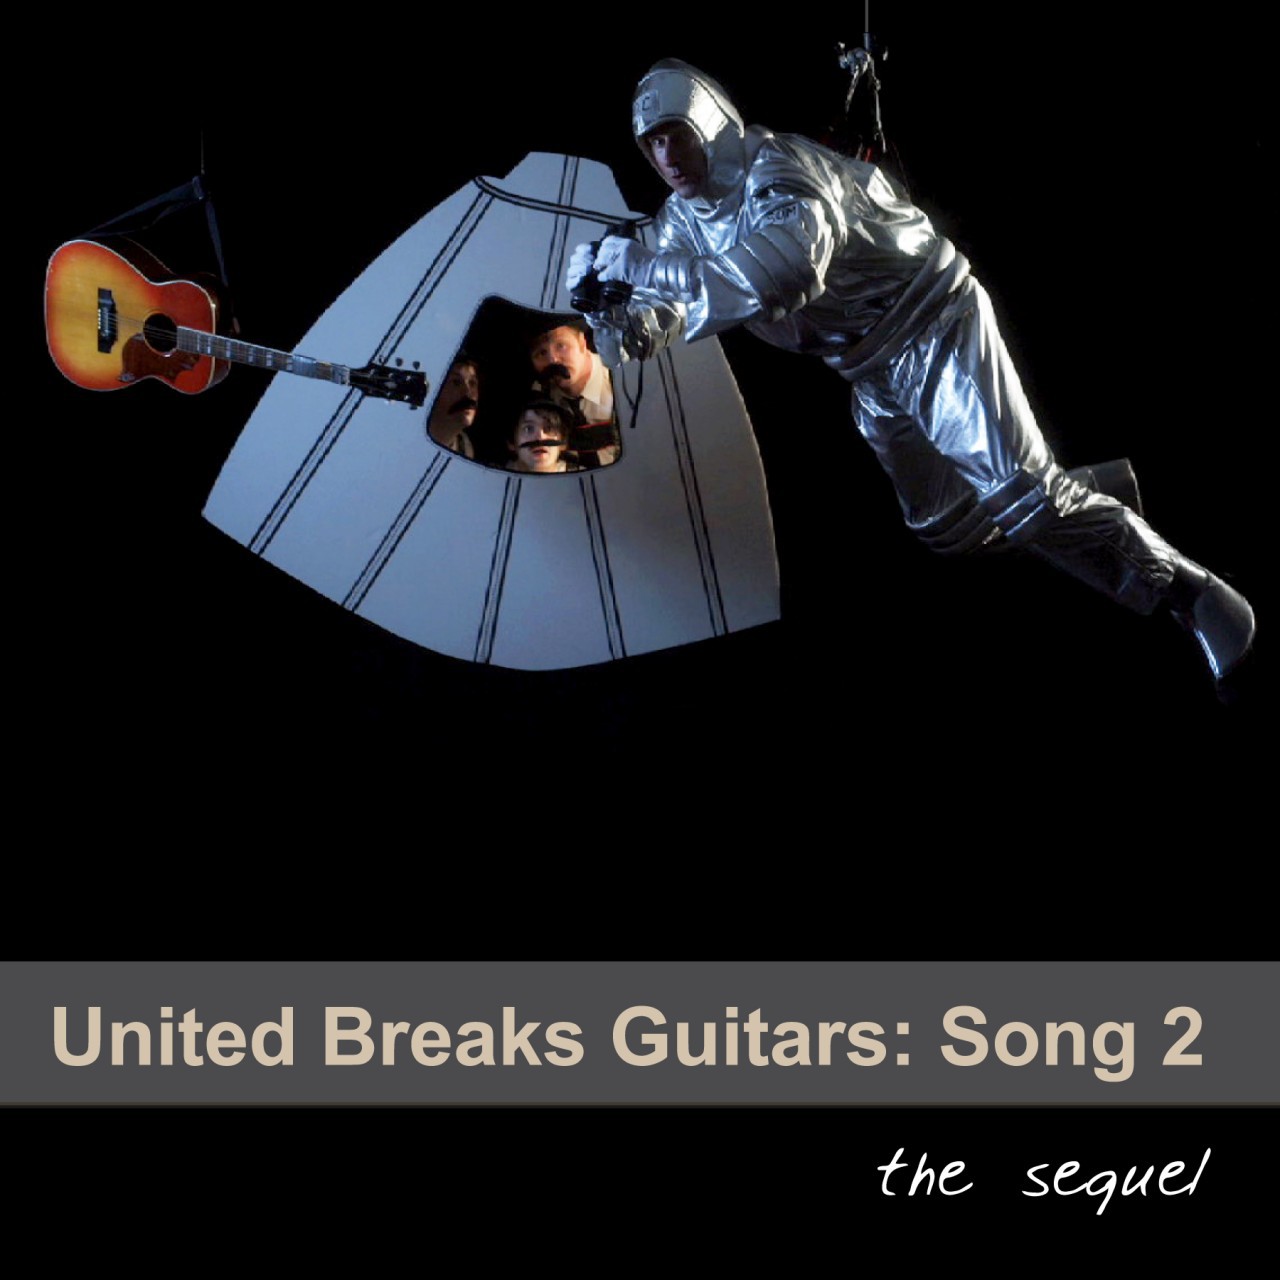 United Breaks Guitars Song 2 Mp3 Single Dave Carroll An Award Winning Singer Songwriter Professional Speaker Author And Consumer Advocate